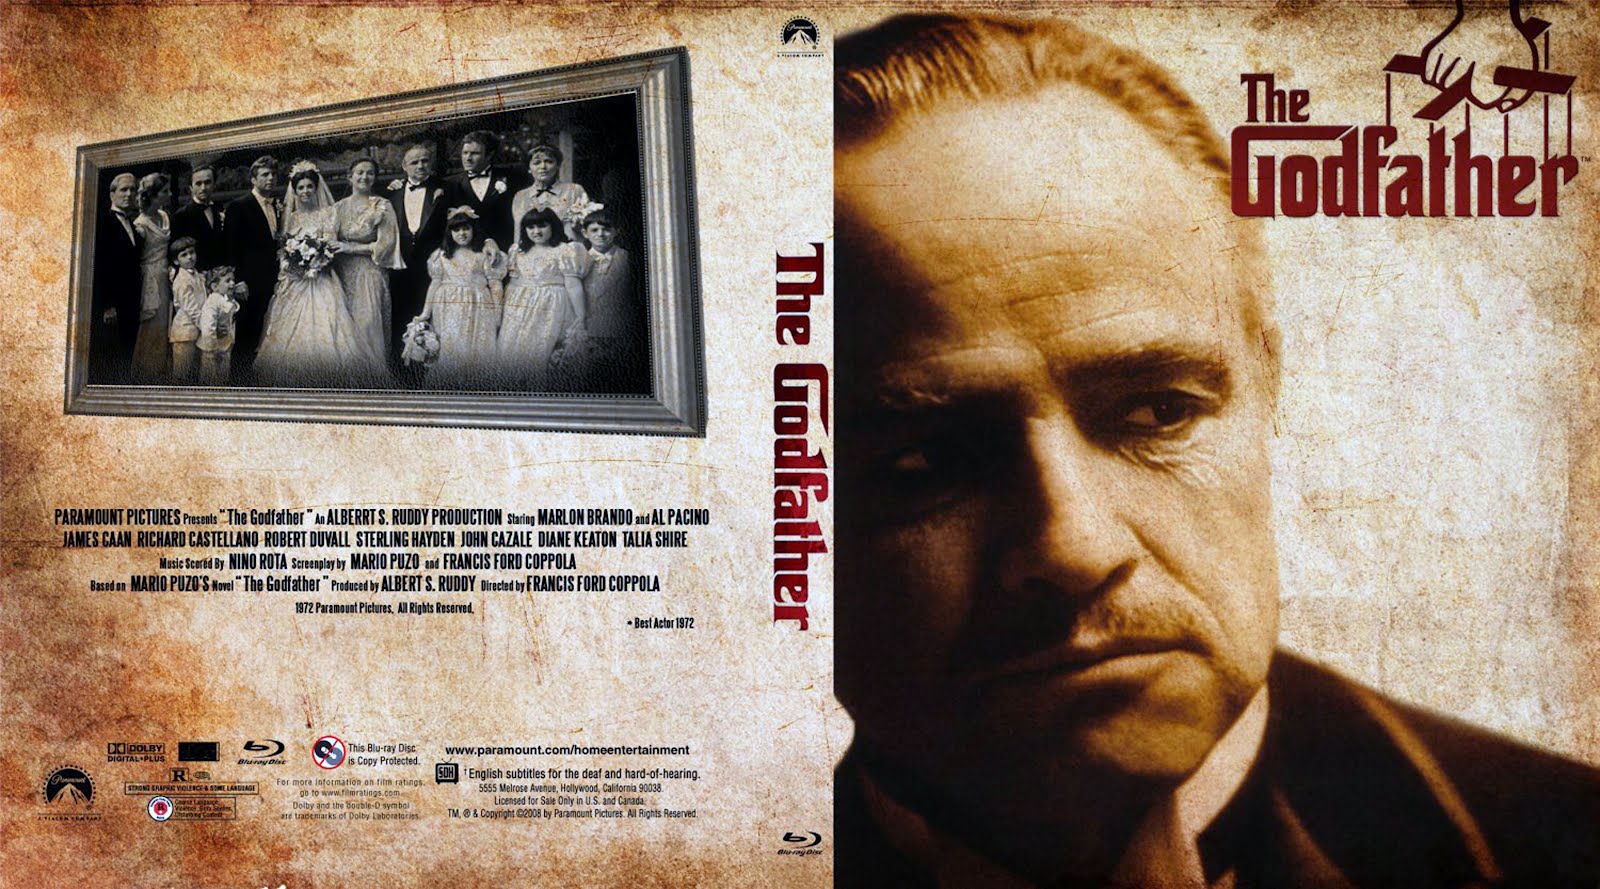 The Godfather Dvd Disk Cover